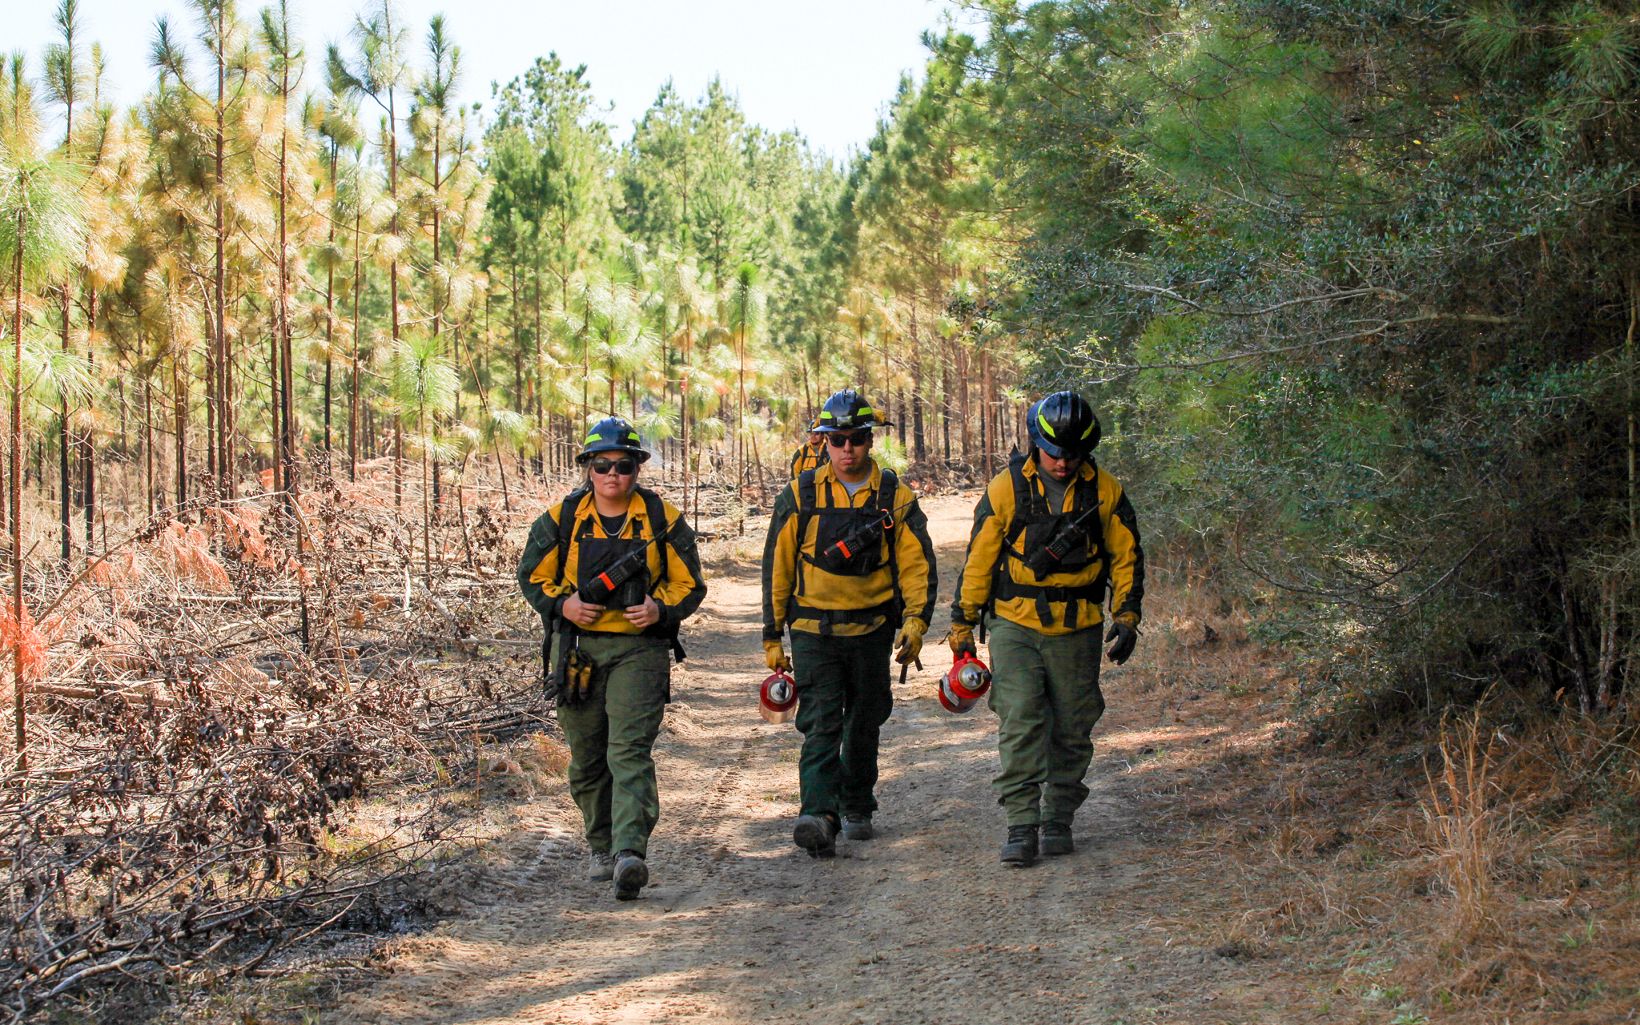 After the Burn Once the active burn is over, Wildland Fire Management crew members monitor the remaining flames and ensure the prescribed fire is extinguished. © Claire Everett/TNC